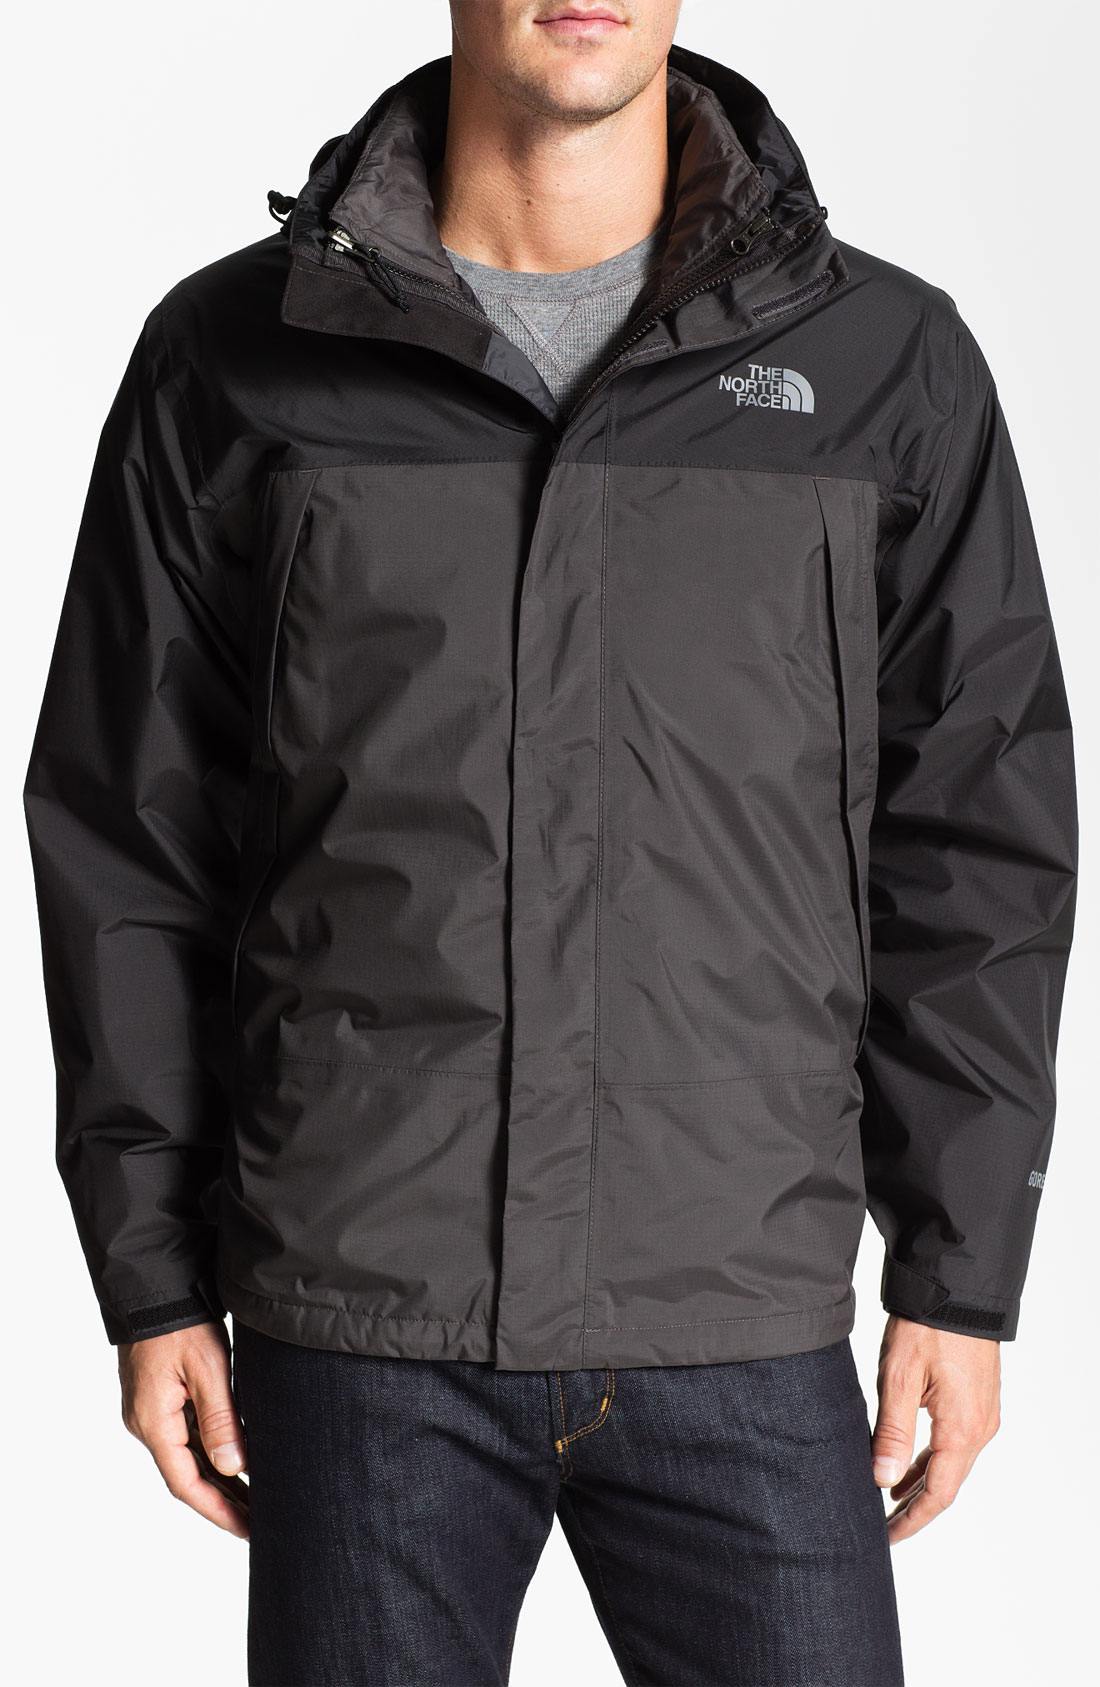 The North Face Mountain Light Triclimate 3in1 Jacket in Gray for Men